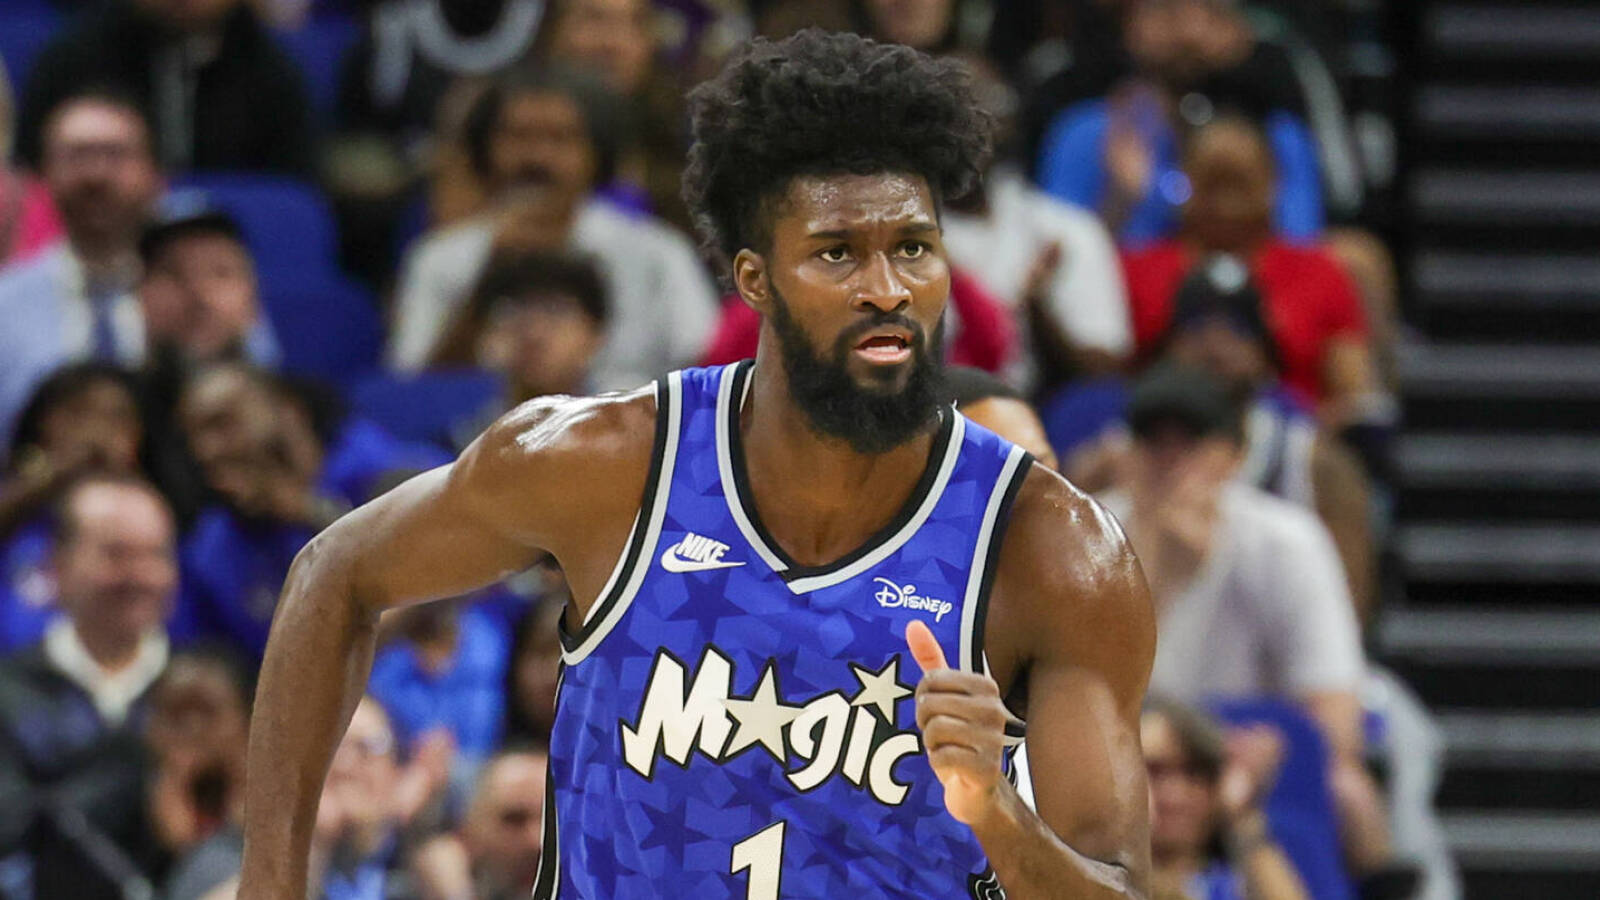 Oft-injured Magic bench player lives up to nickname with impressive stat